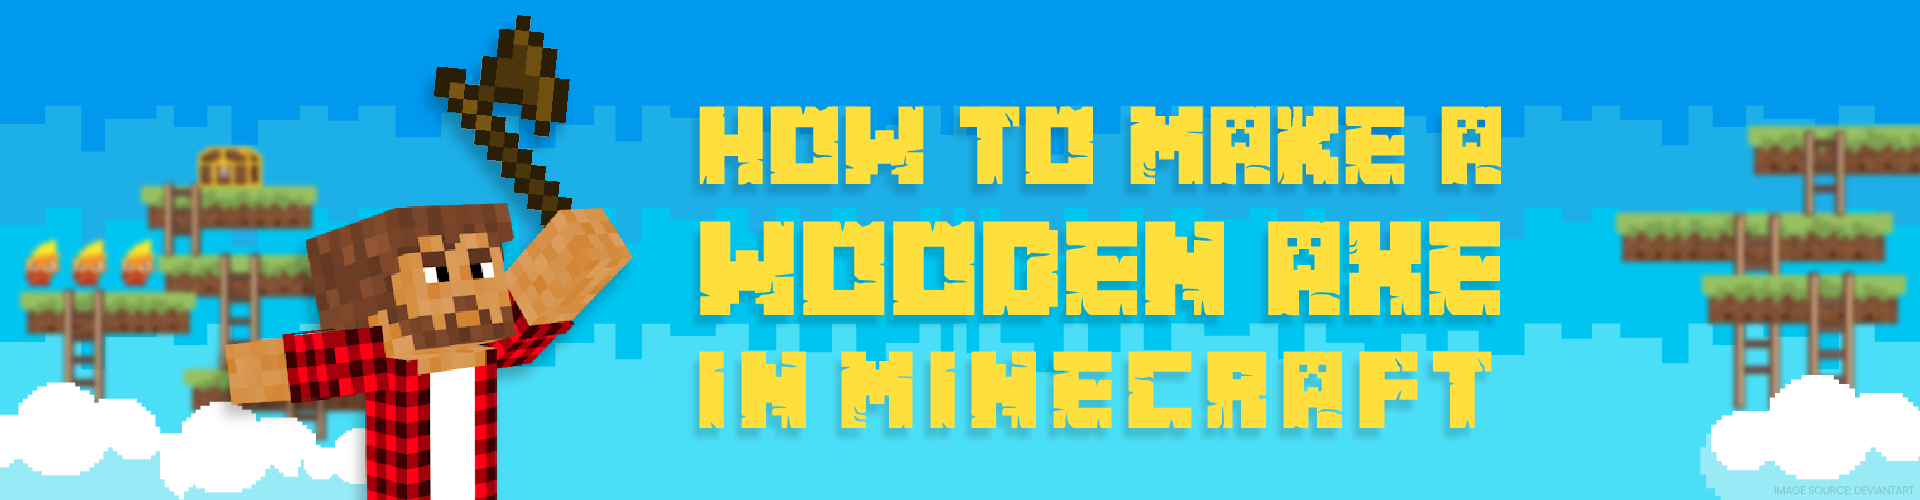 Make a Wooden Axe in Minecraft